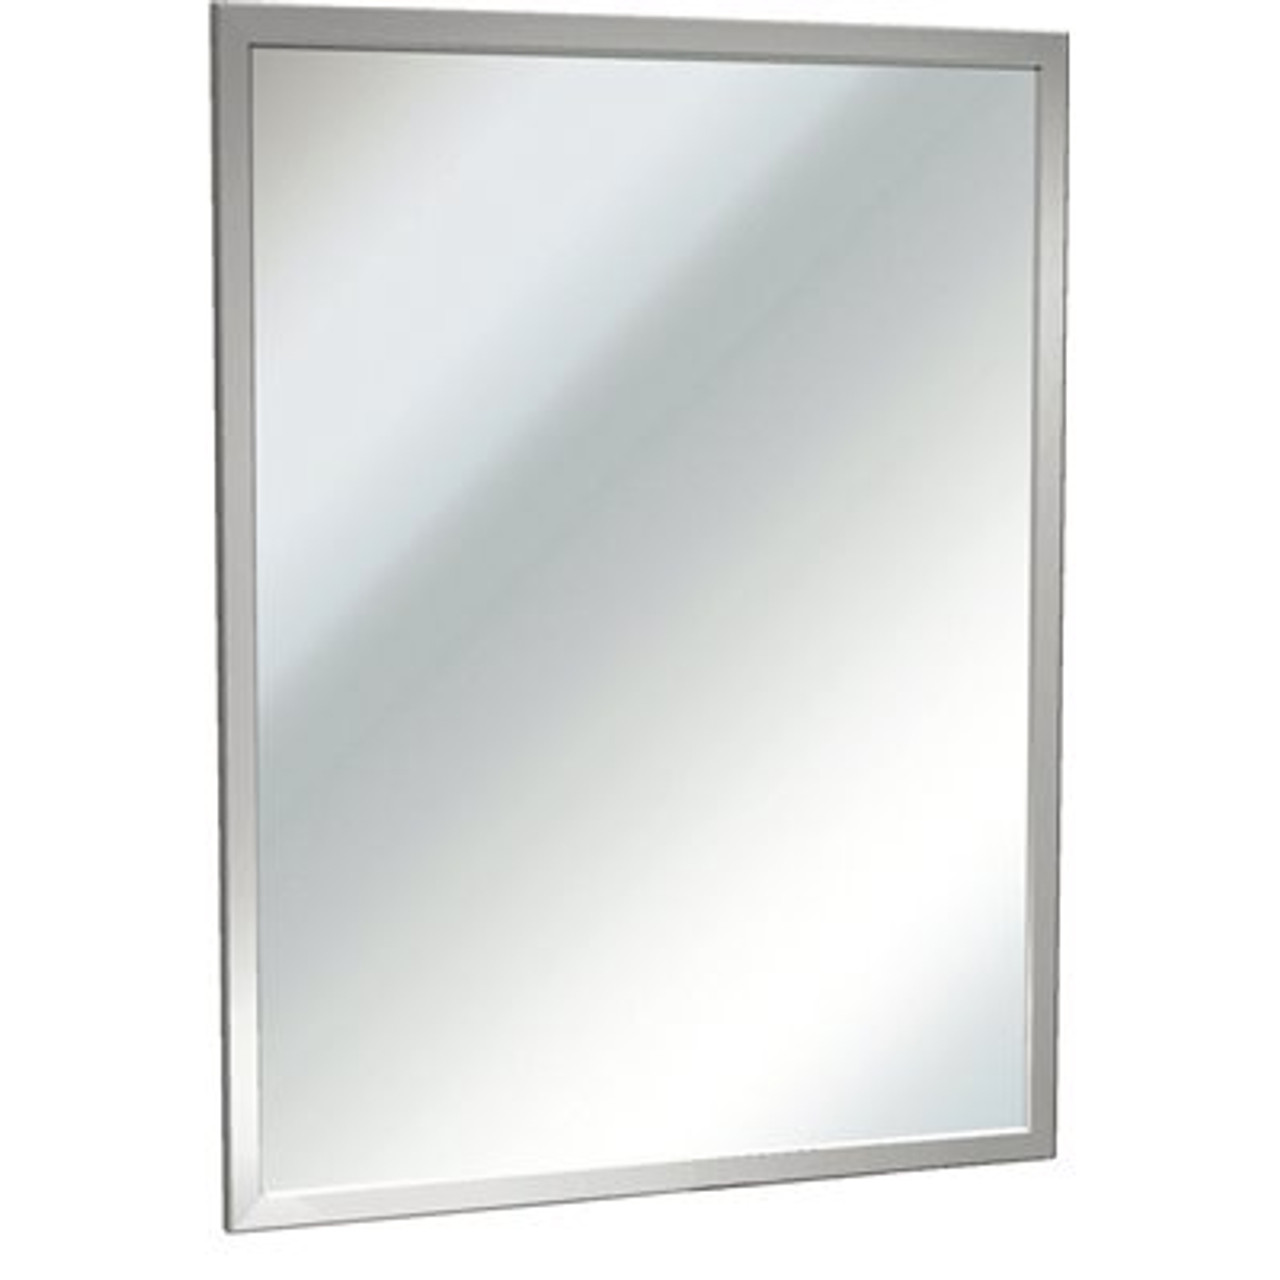 ASI 24 in. W x 36 in. H Rectangular Framed Inter-Lok Angle Plate Glass Wall Mount Bathroom Vanity Mirror in Stainless Steel